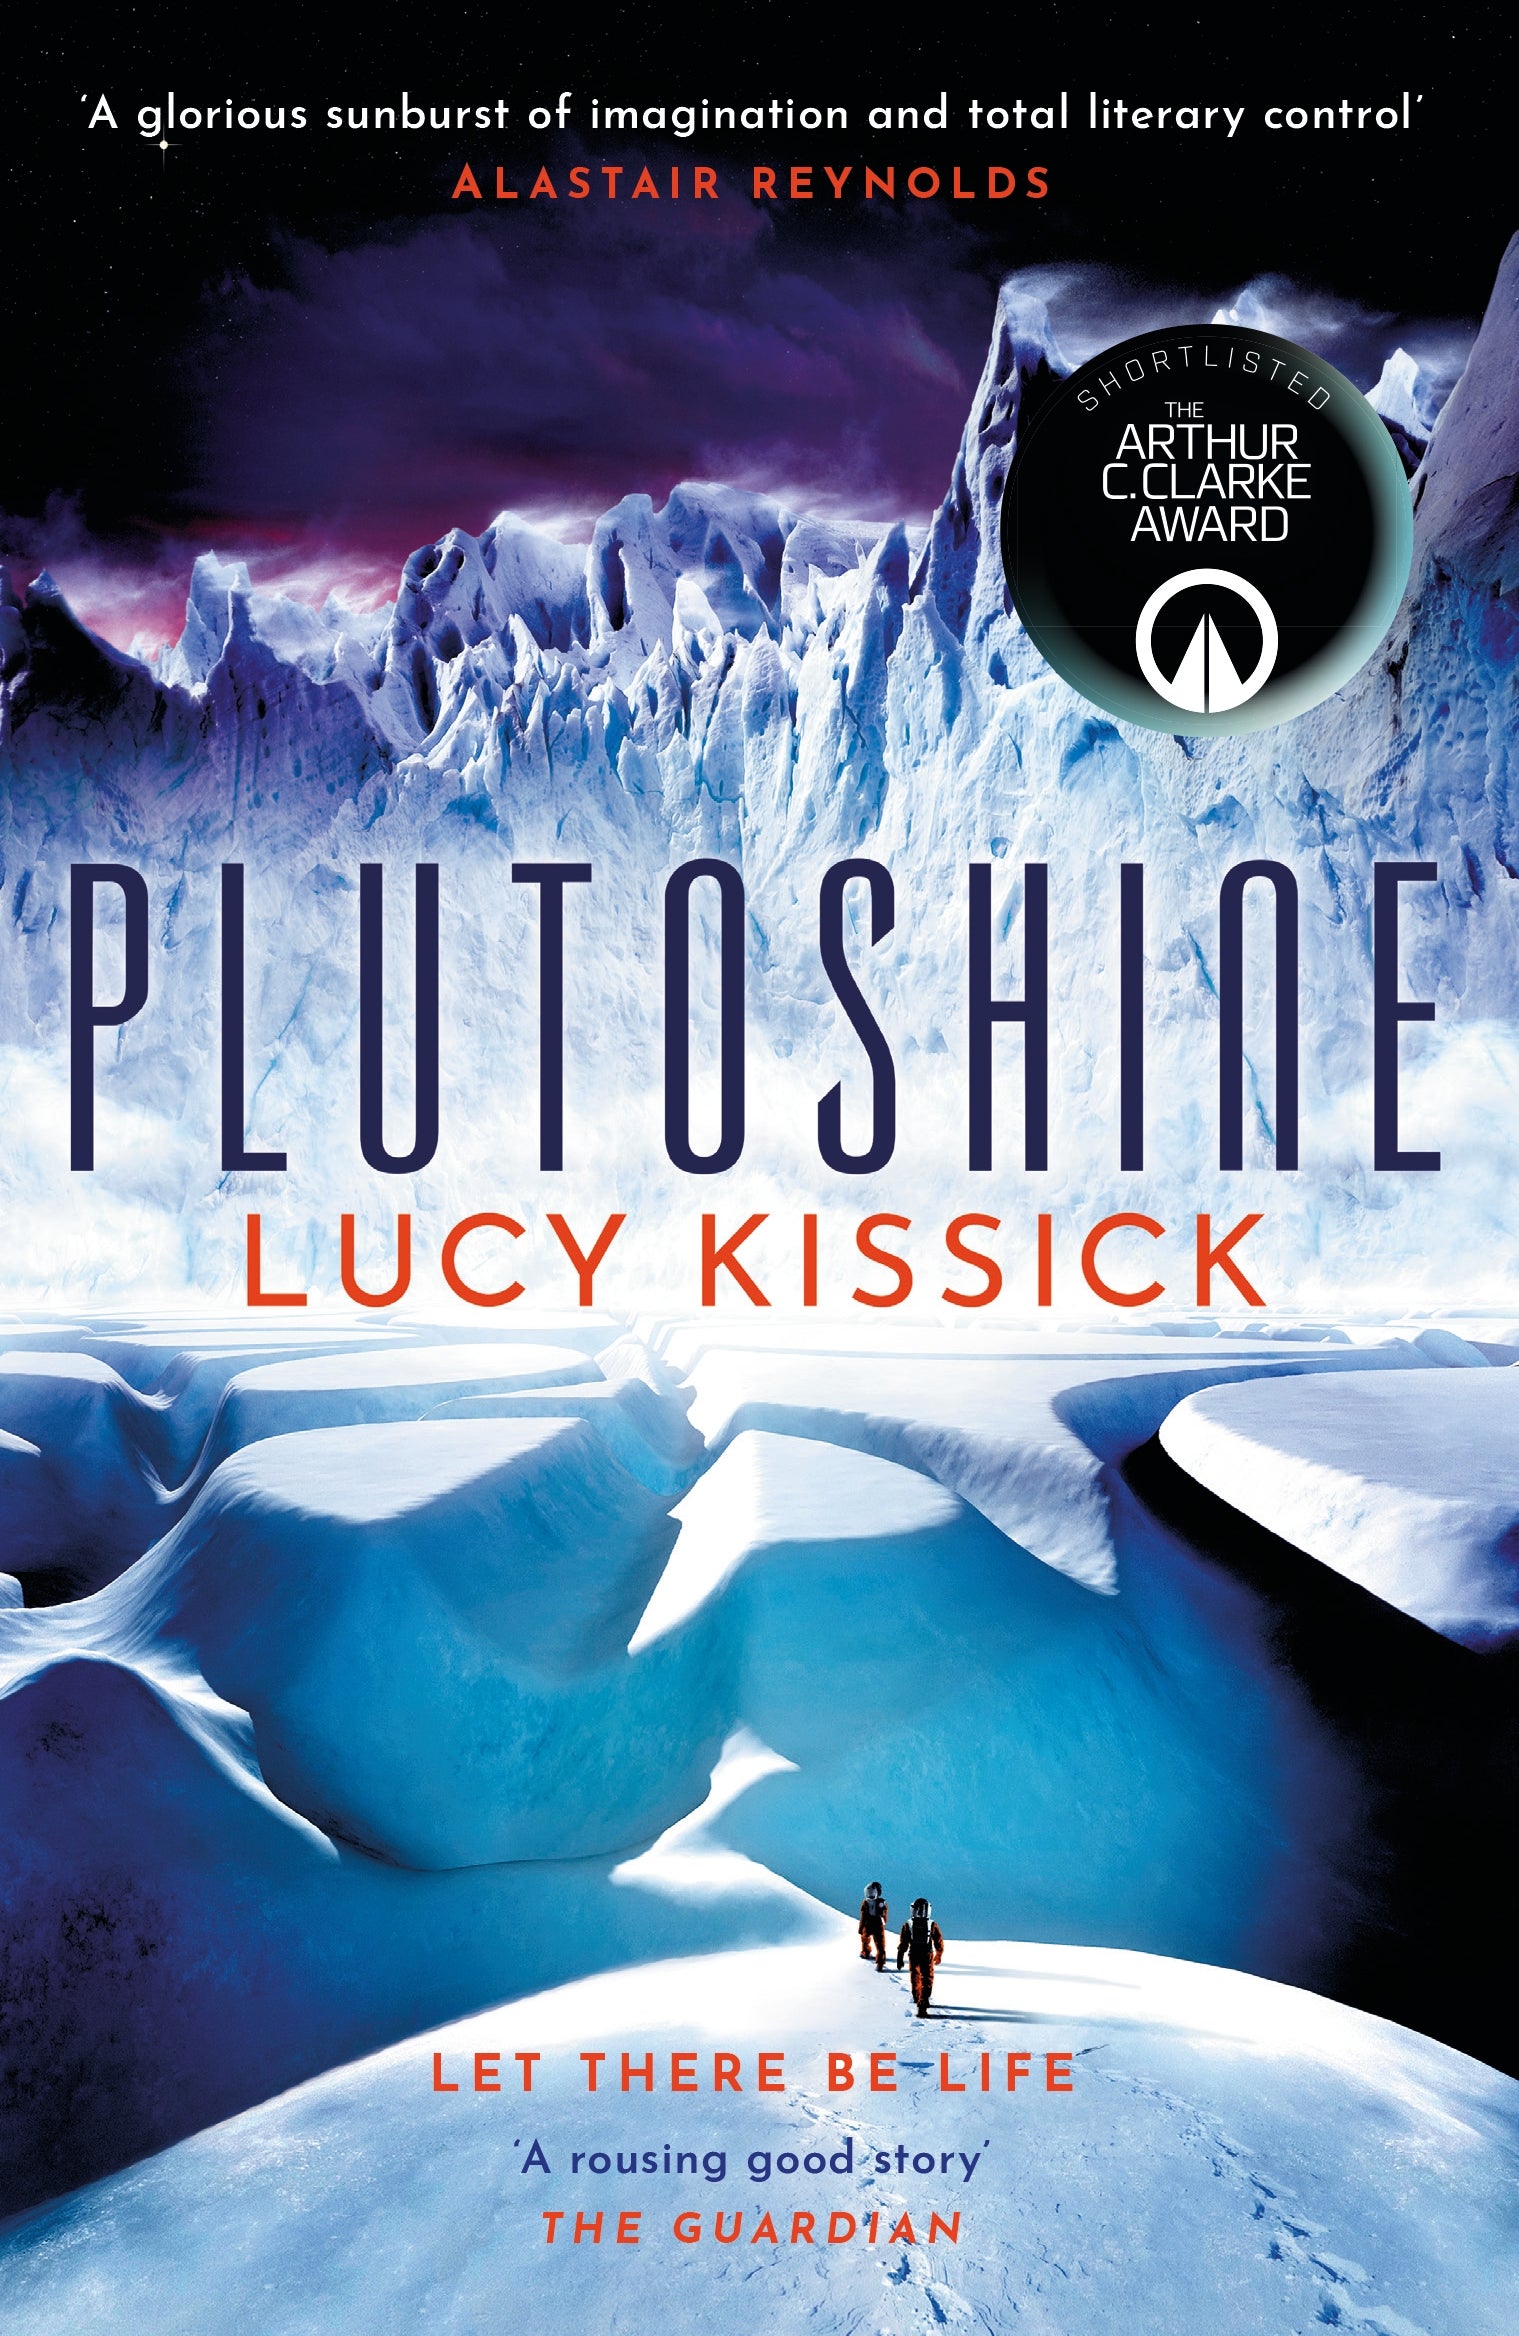 Plutoshine by Lucy Kissick